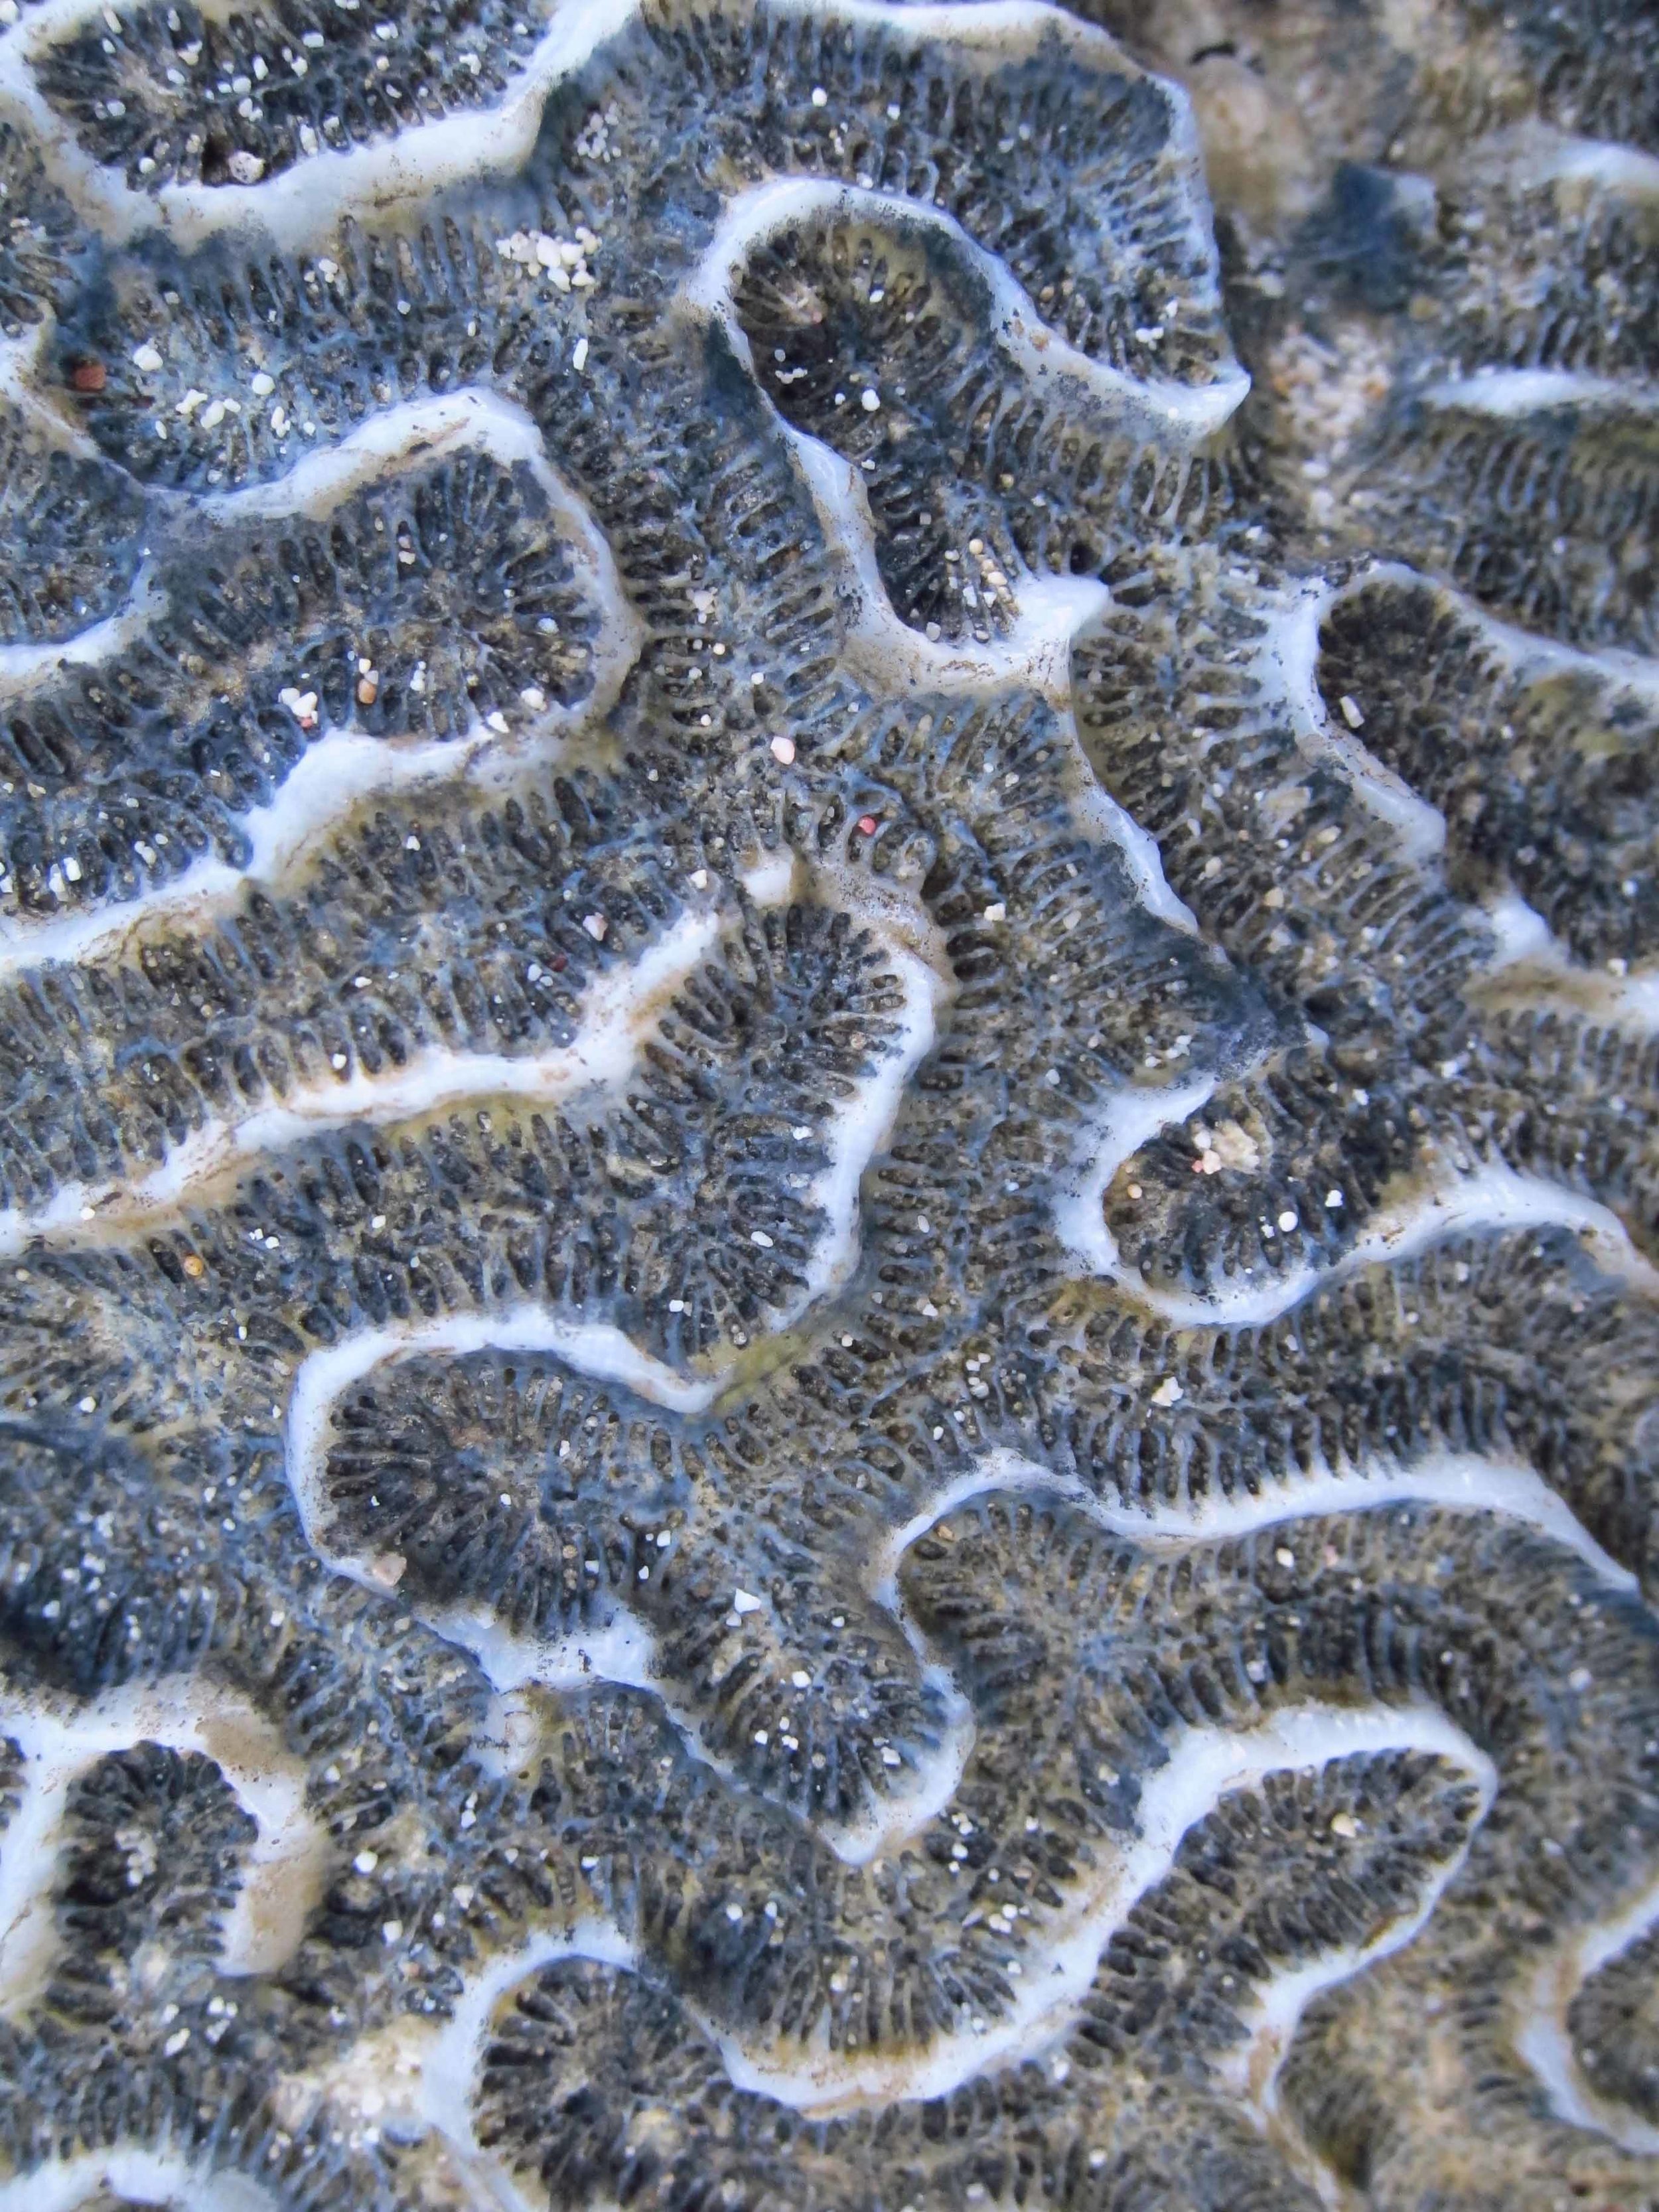   Brain Coral, New Providence  